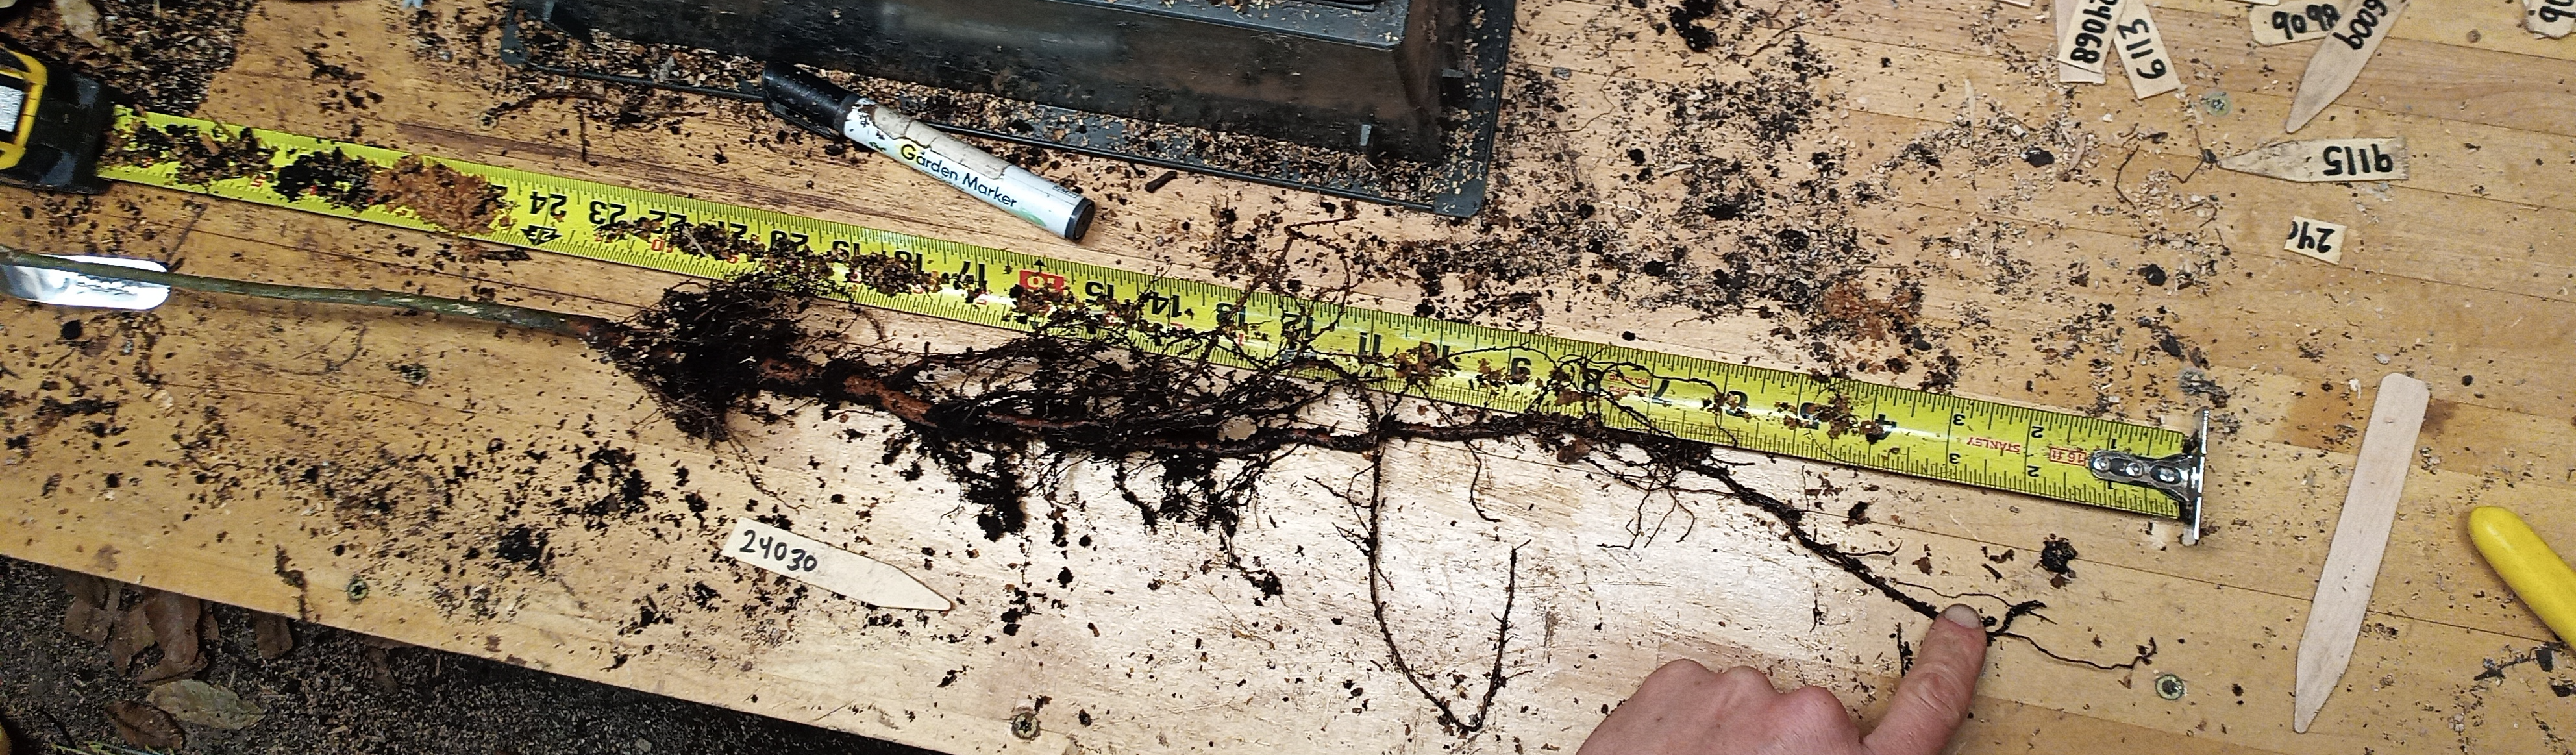 Example of 24" Chestnut Seedling Root Structure